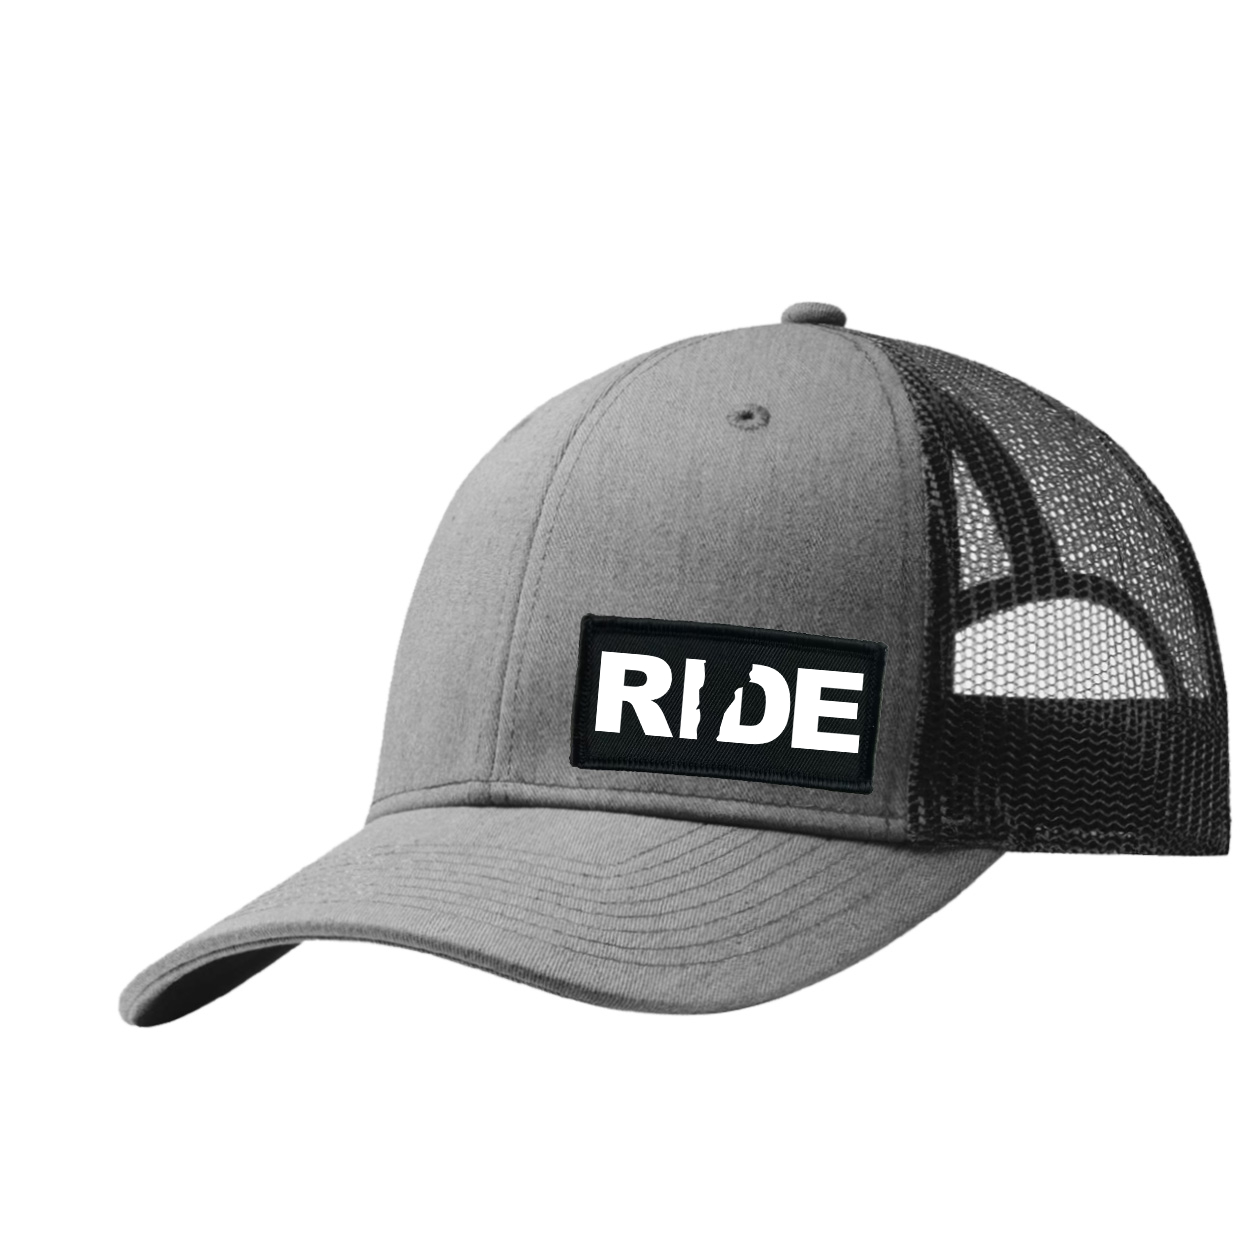 Ride Vermont Night Out Woven Patch Snapback Trucker Hat Heather Gray/Black (White Logo)